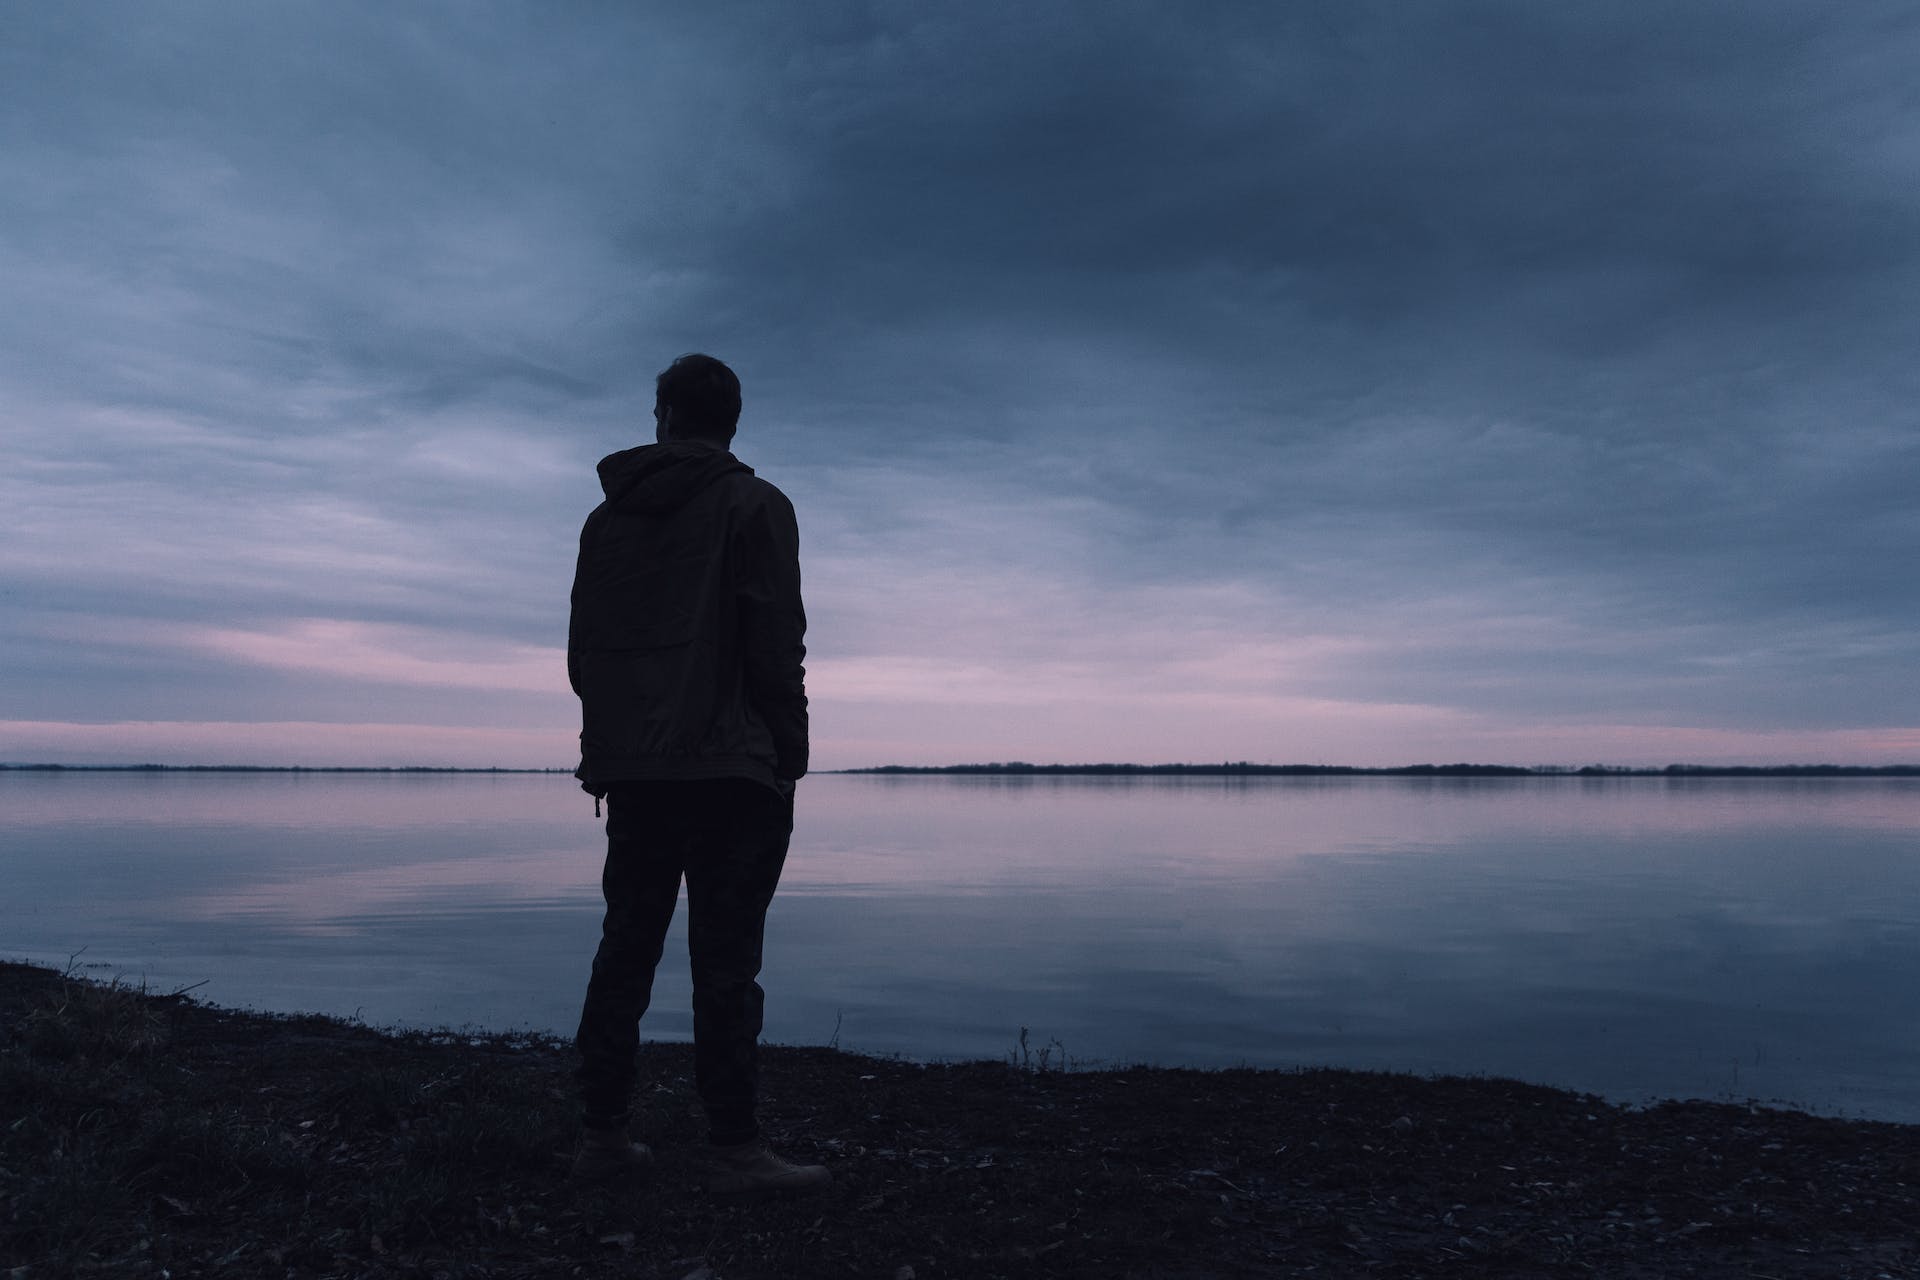 Silhouette of a man standing near a lake | Source: Pexels